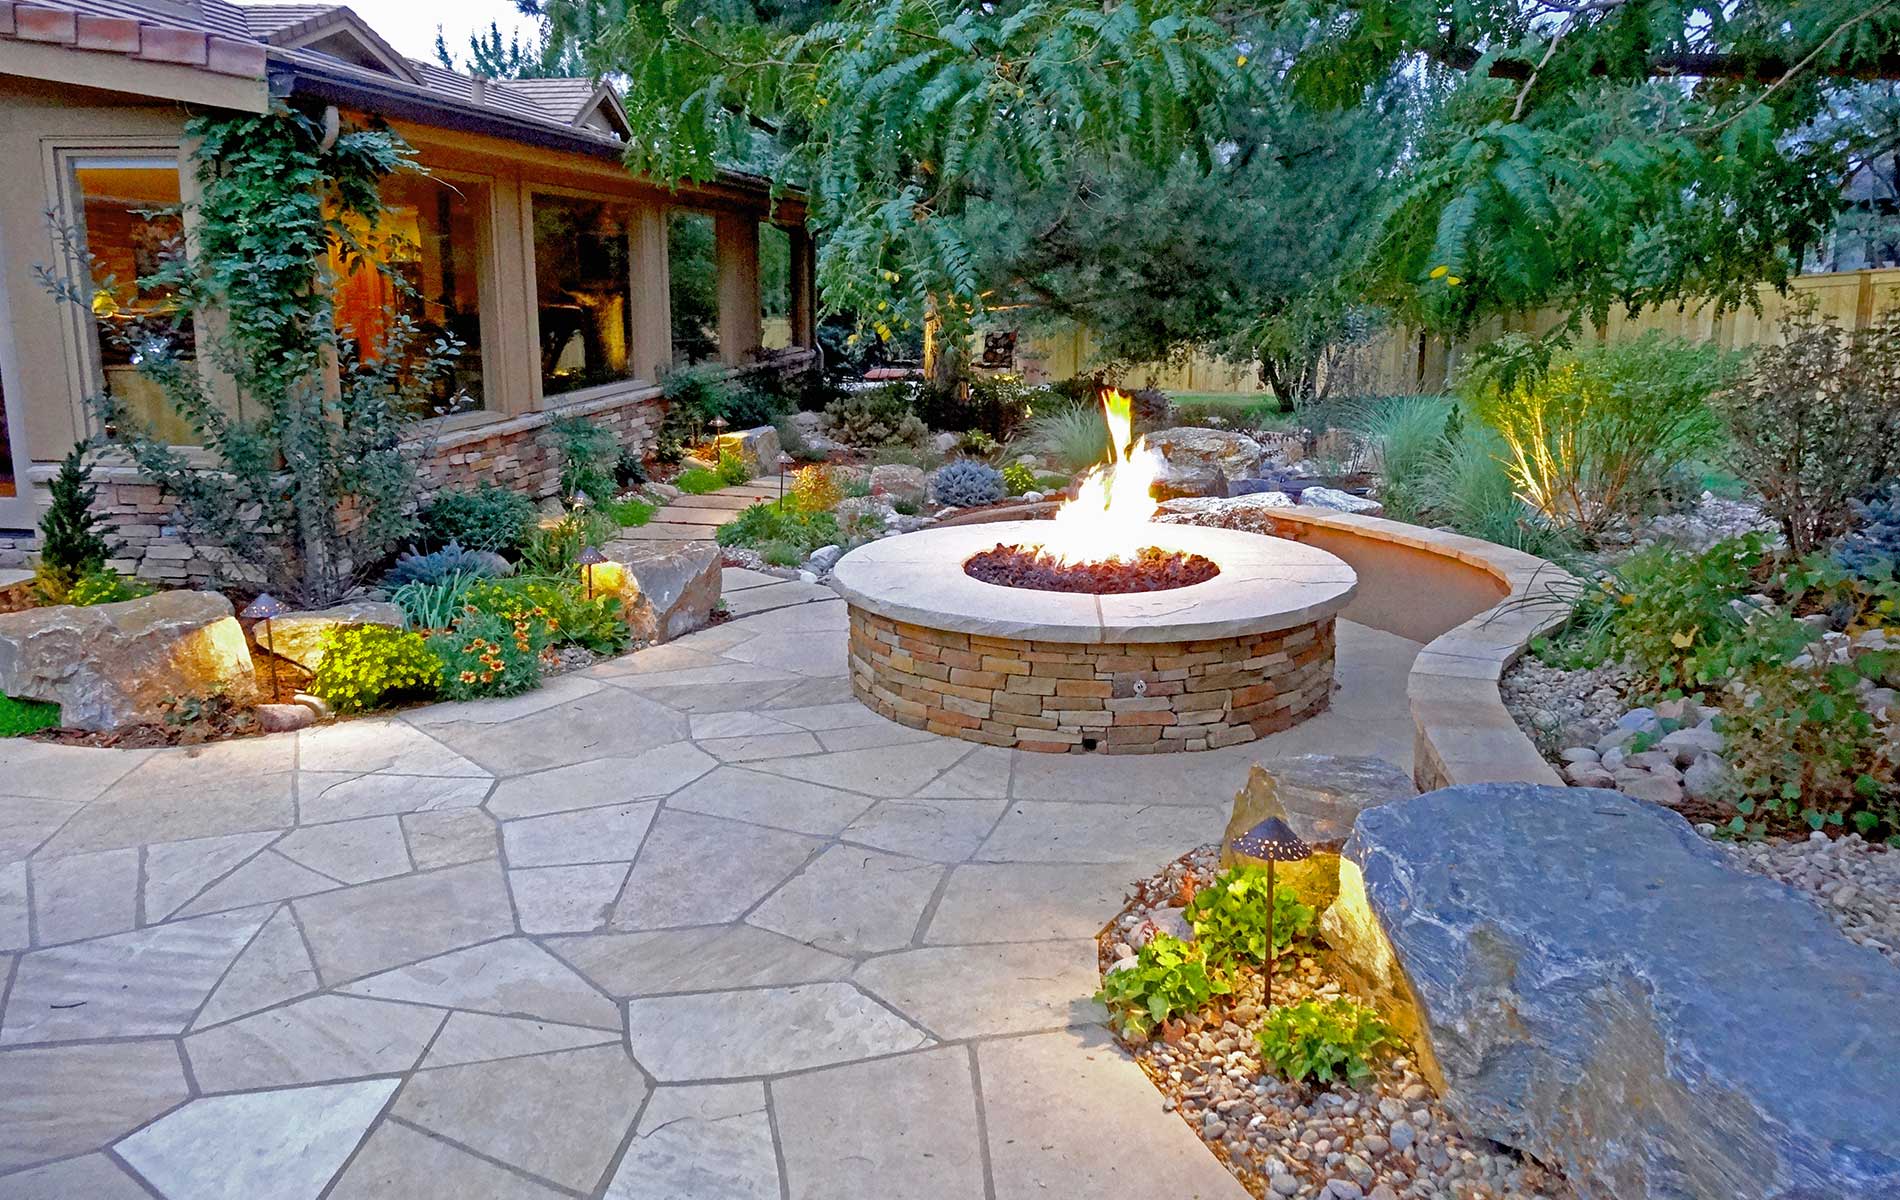 Irregular Flagstone Patio and Stone Fire Feature in Rustic Ranch in Greenwood Village Mile High Landscaping in Denver